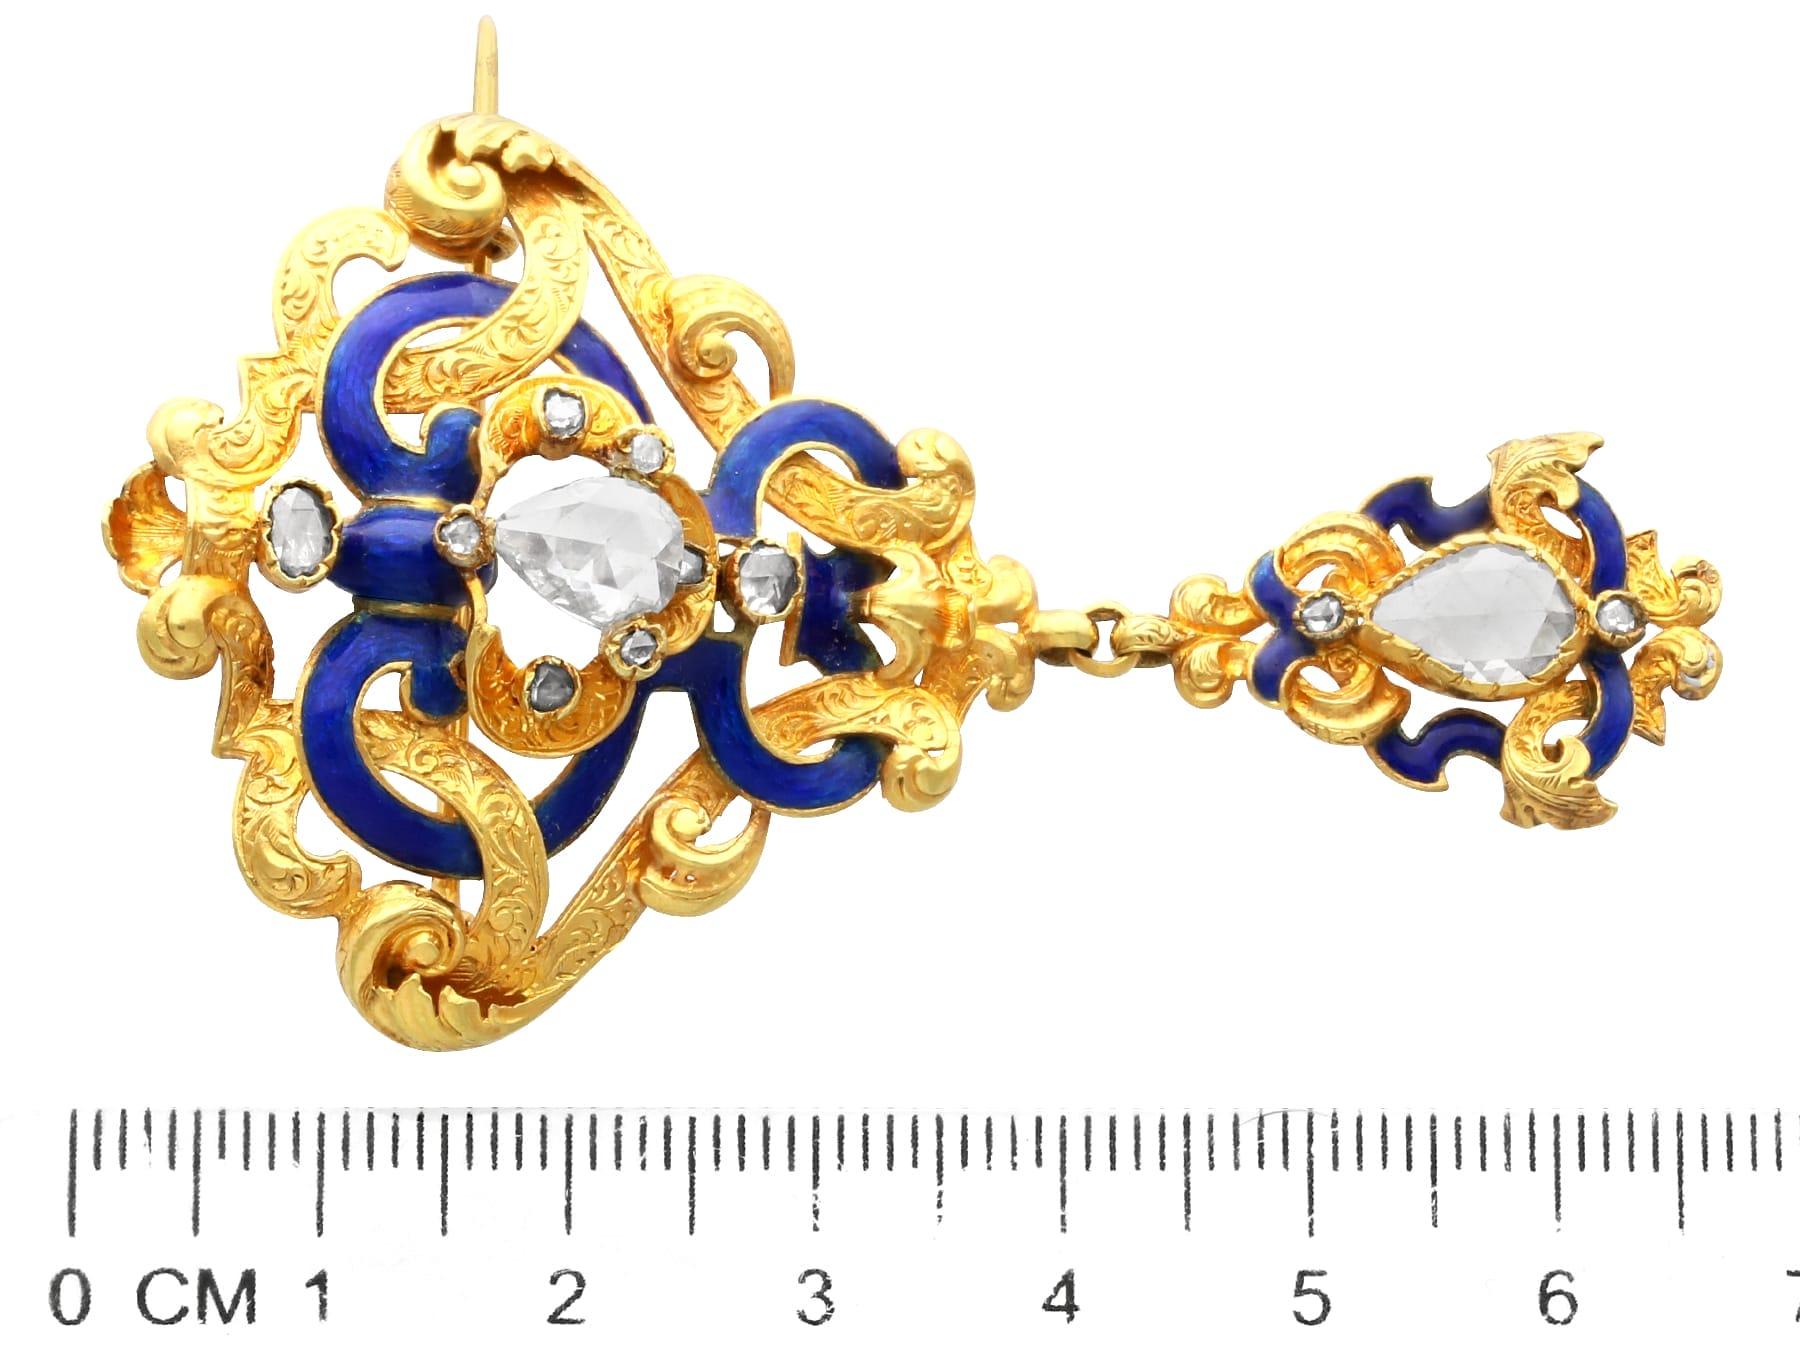 Antique Victorian 1.38 Carat Diamond Enamel and 21k Yellow Gold Brooch  In Excellent Condition For Sale In Jesmond, Newcastle Upon Tyne